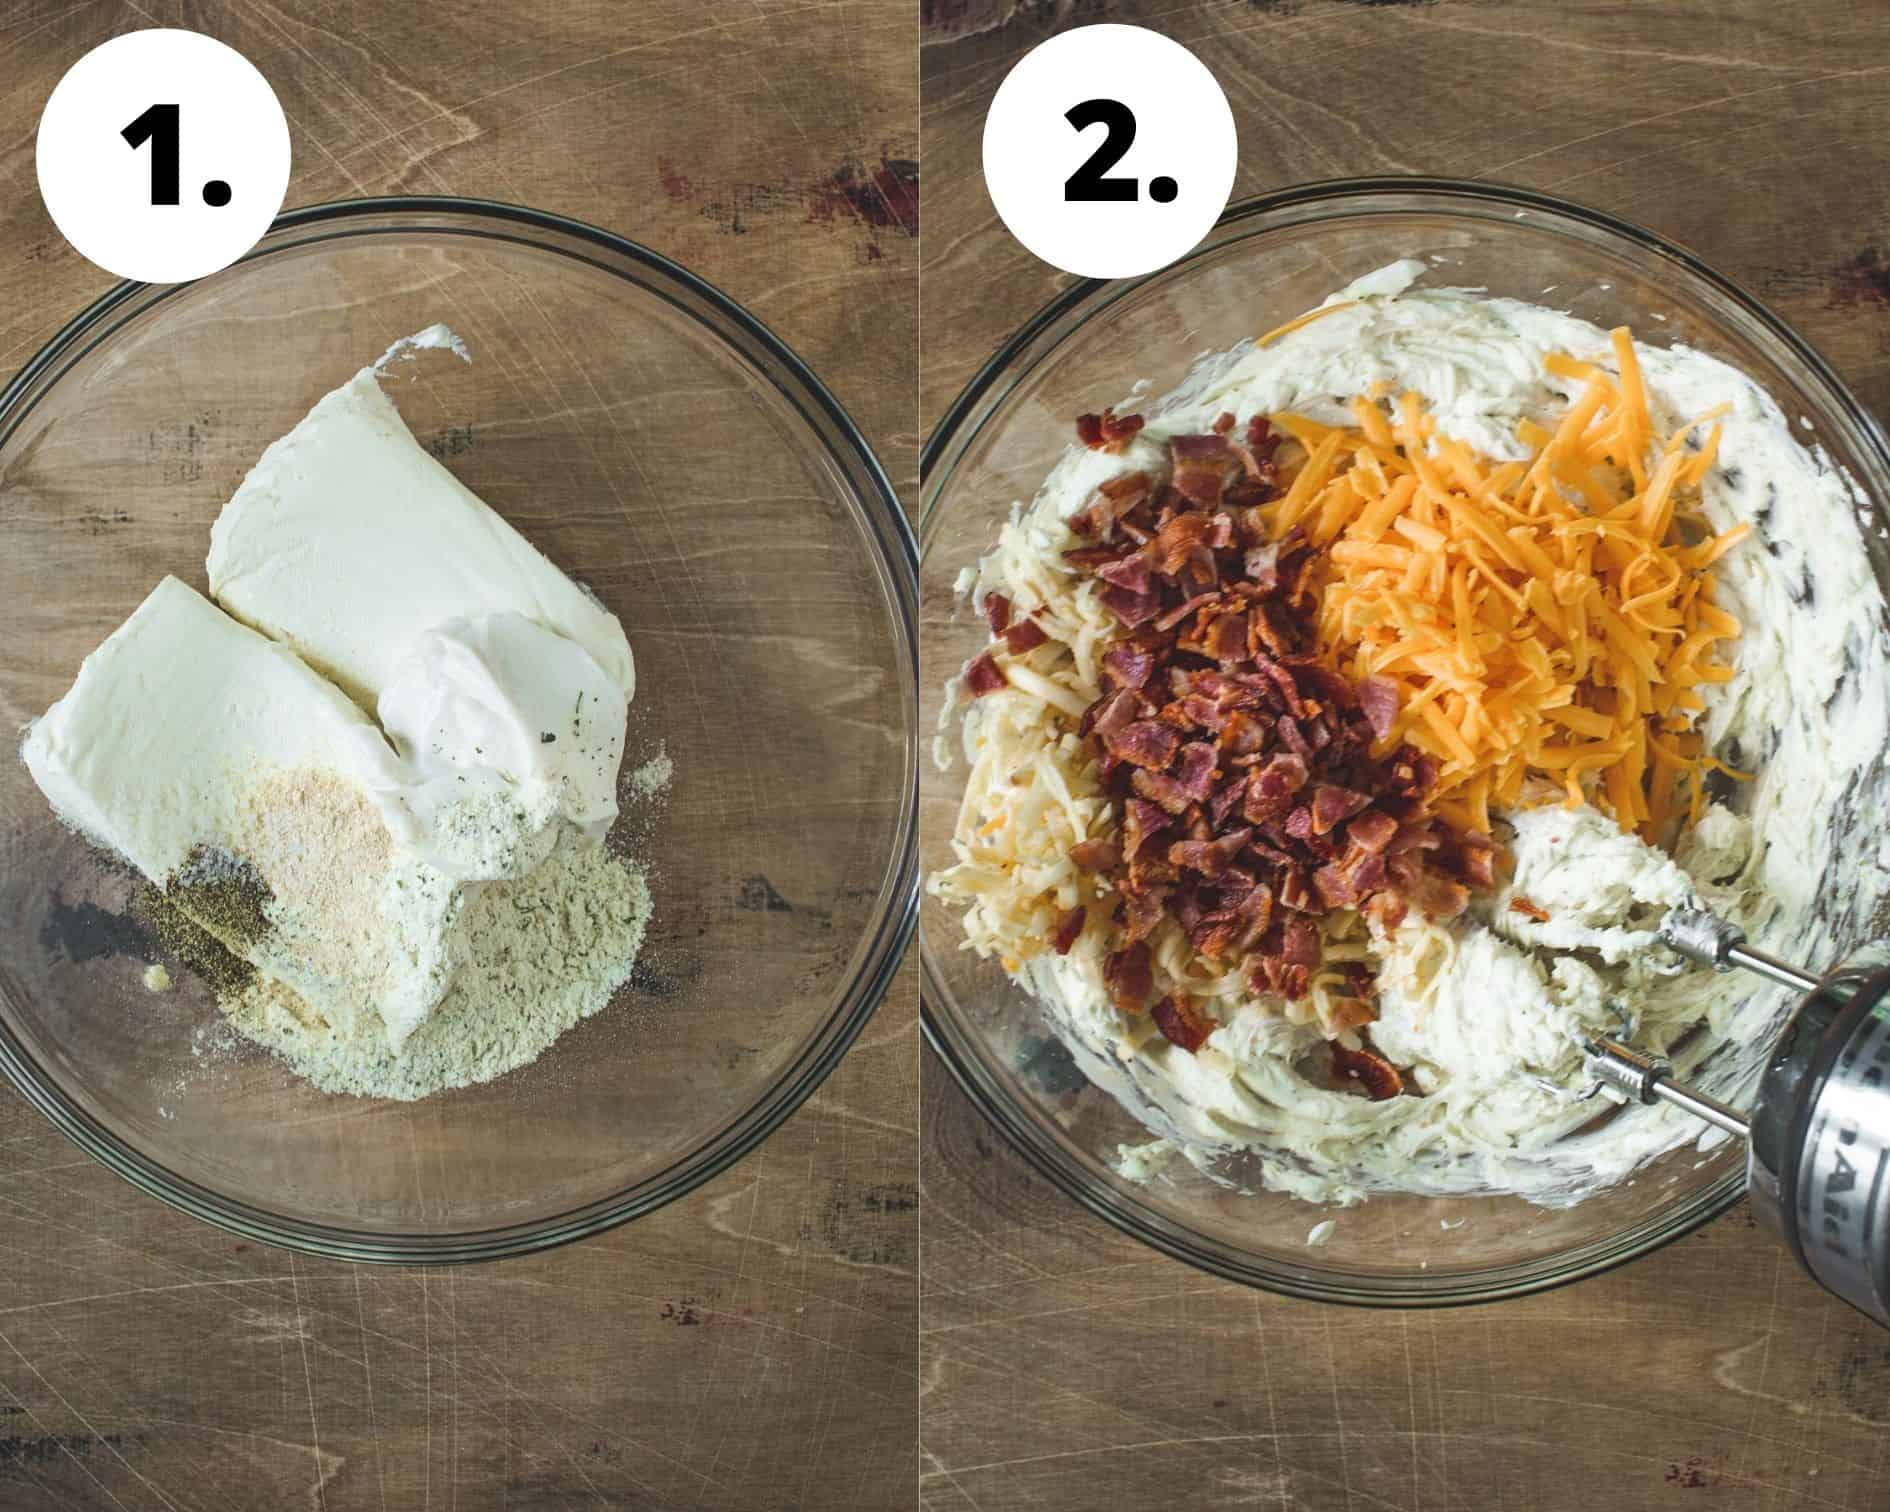 Bacon ranch cheese ball process steps 1 and 2.